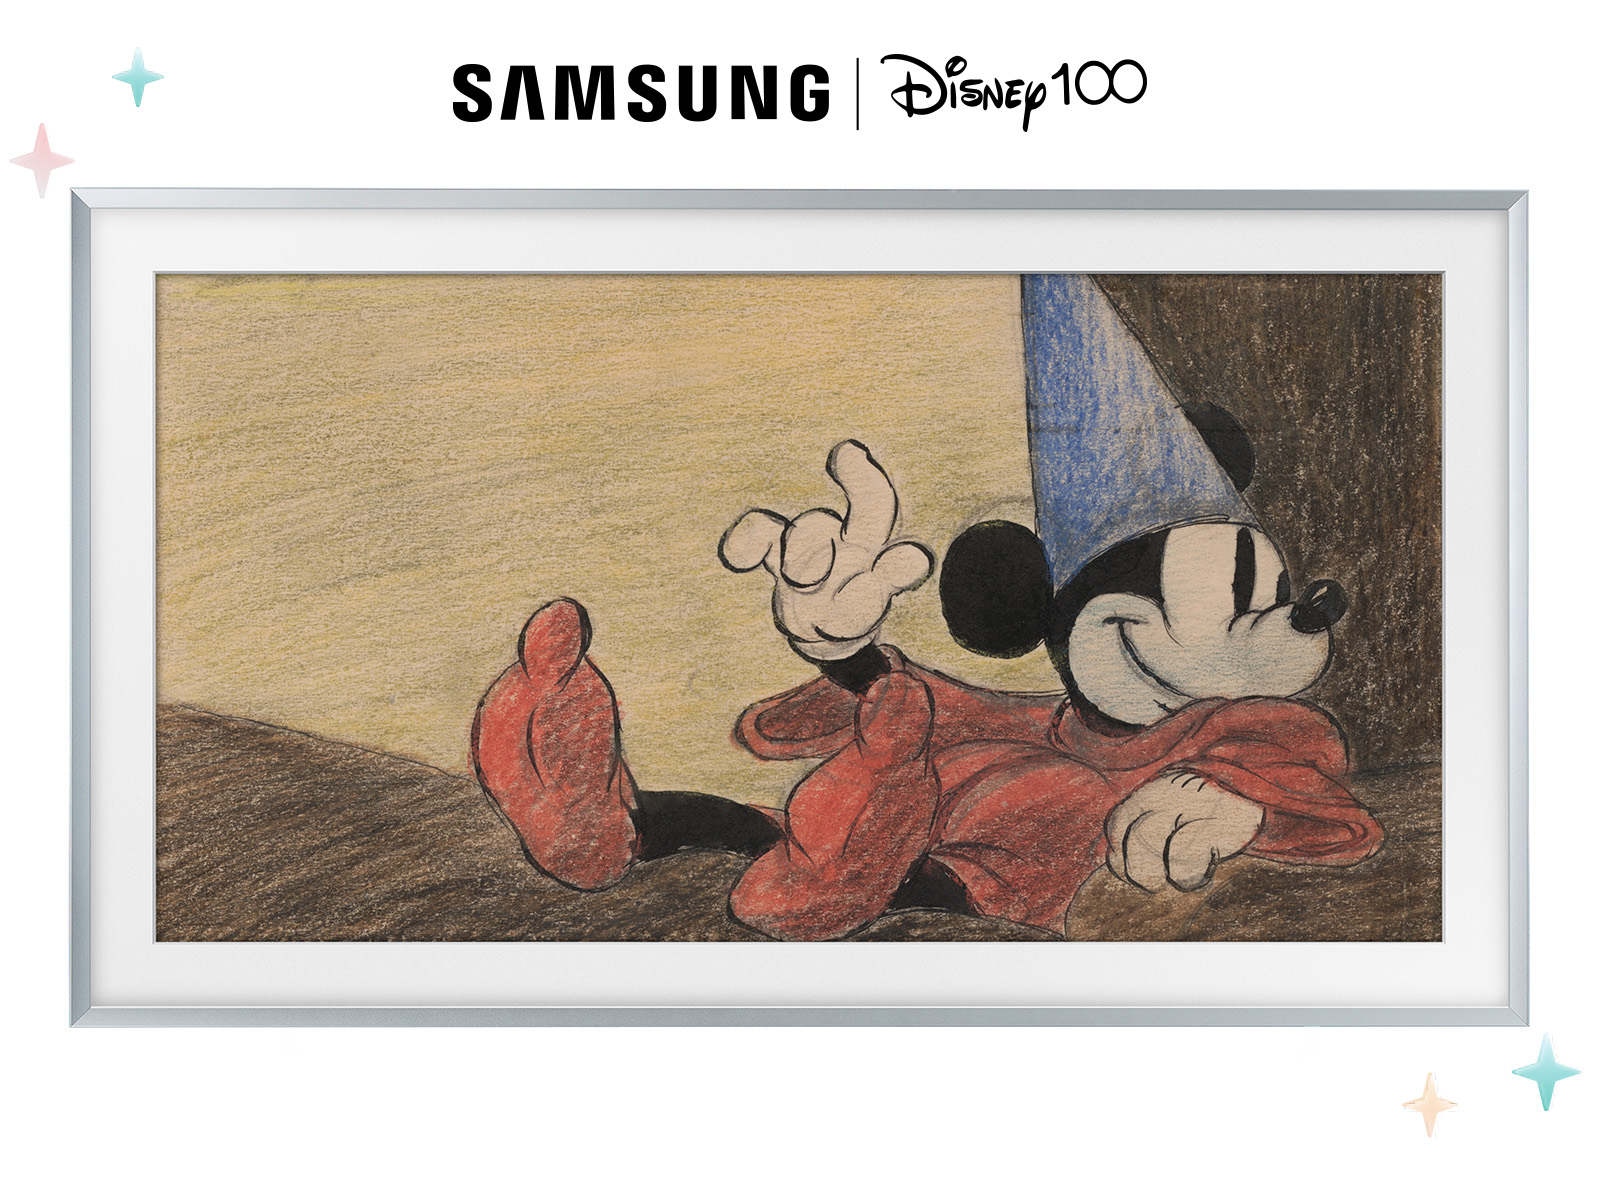 The Frame - Disney100 Edition, TVs Support